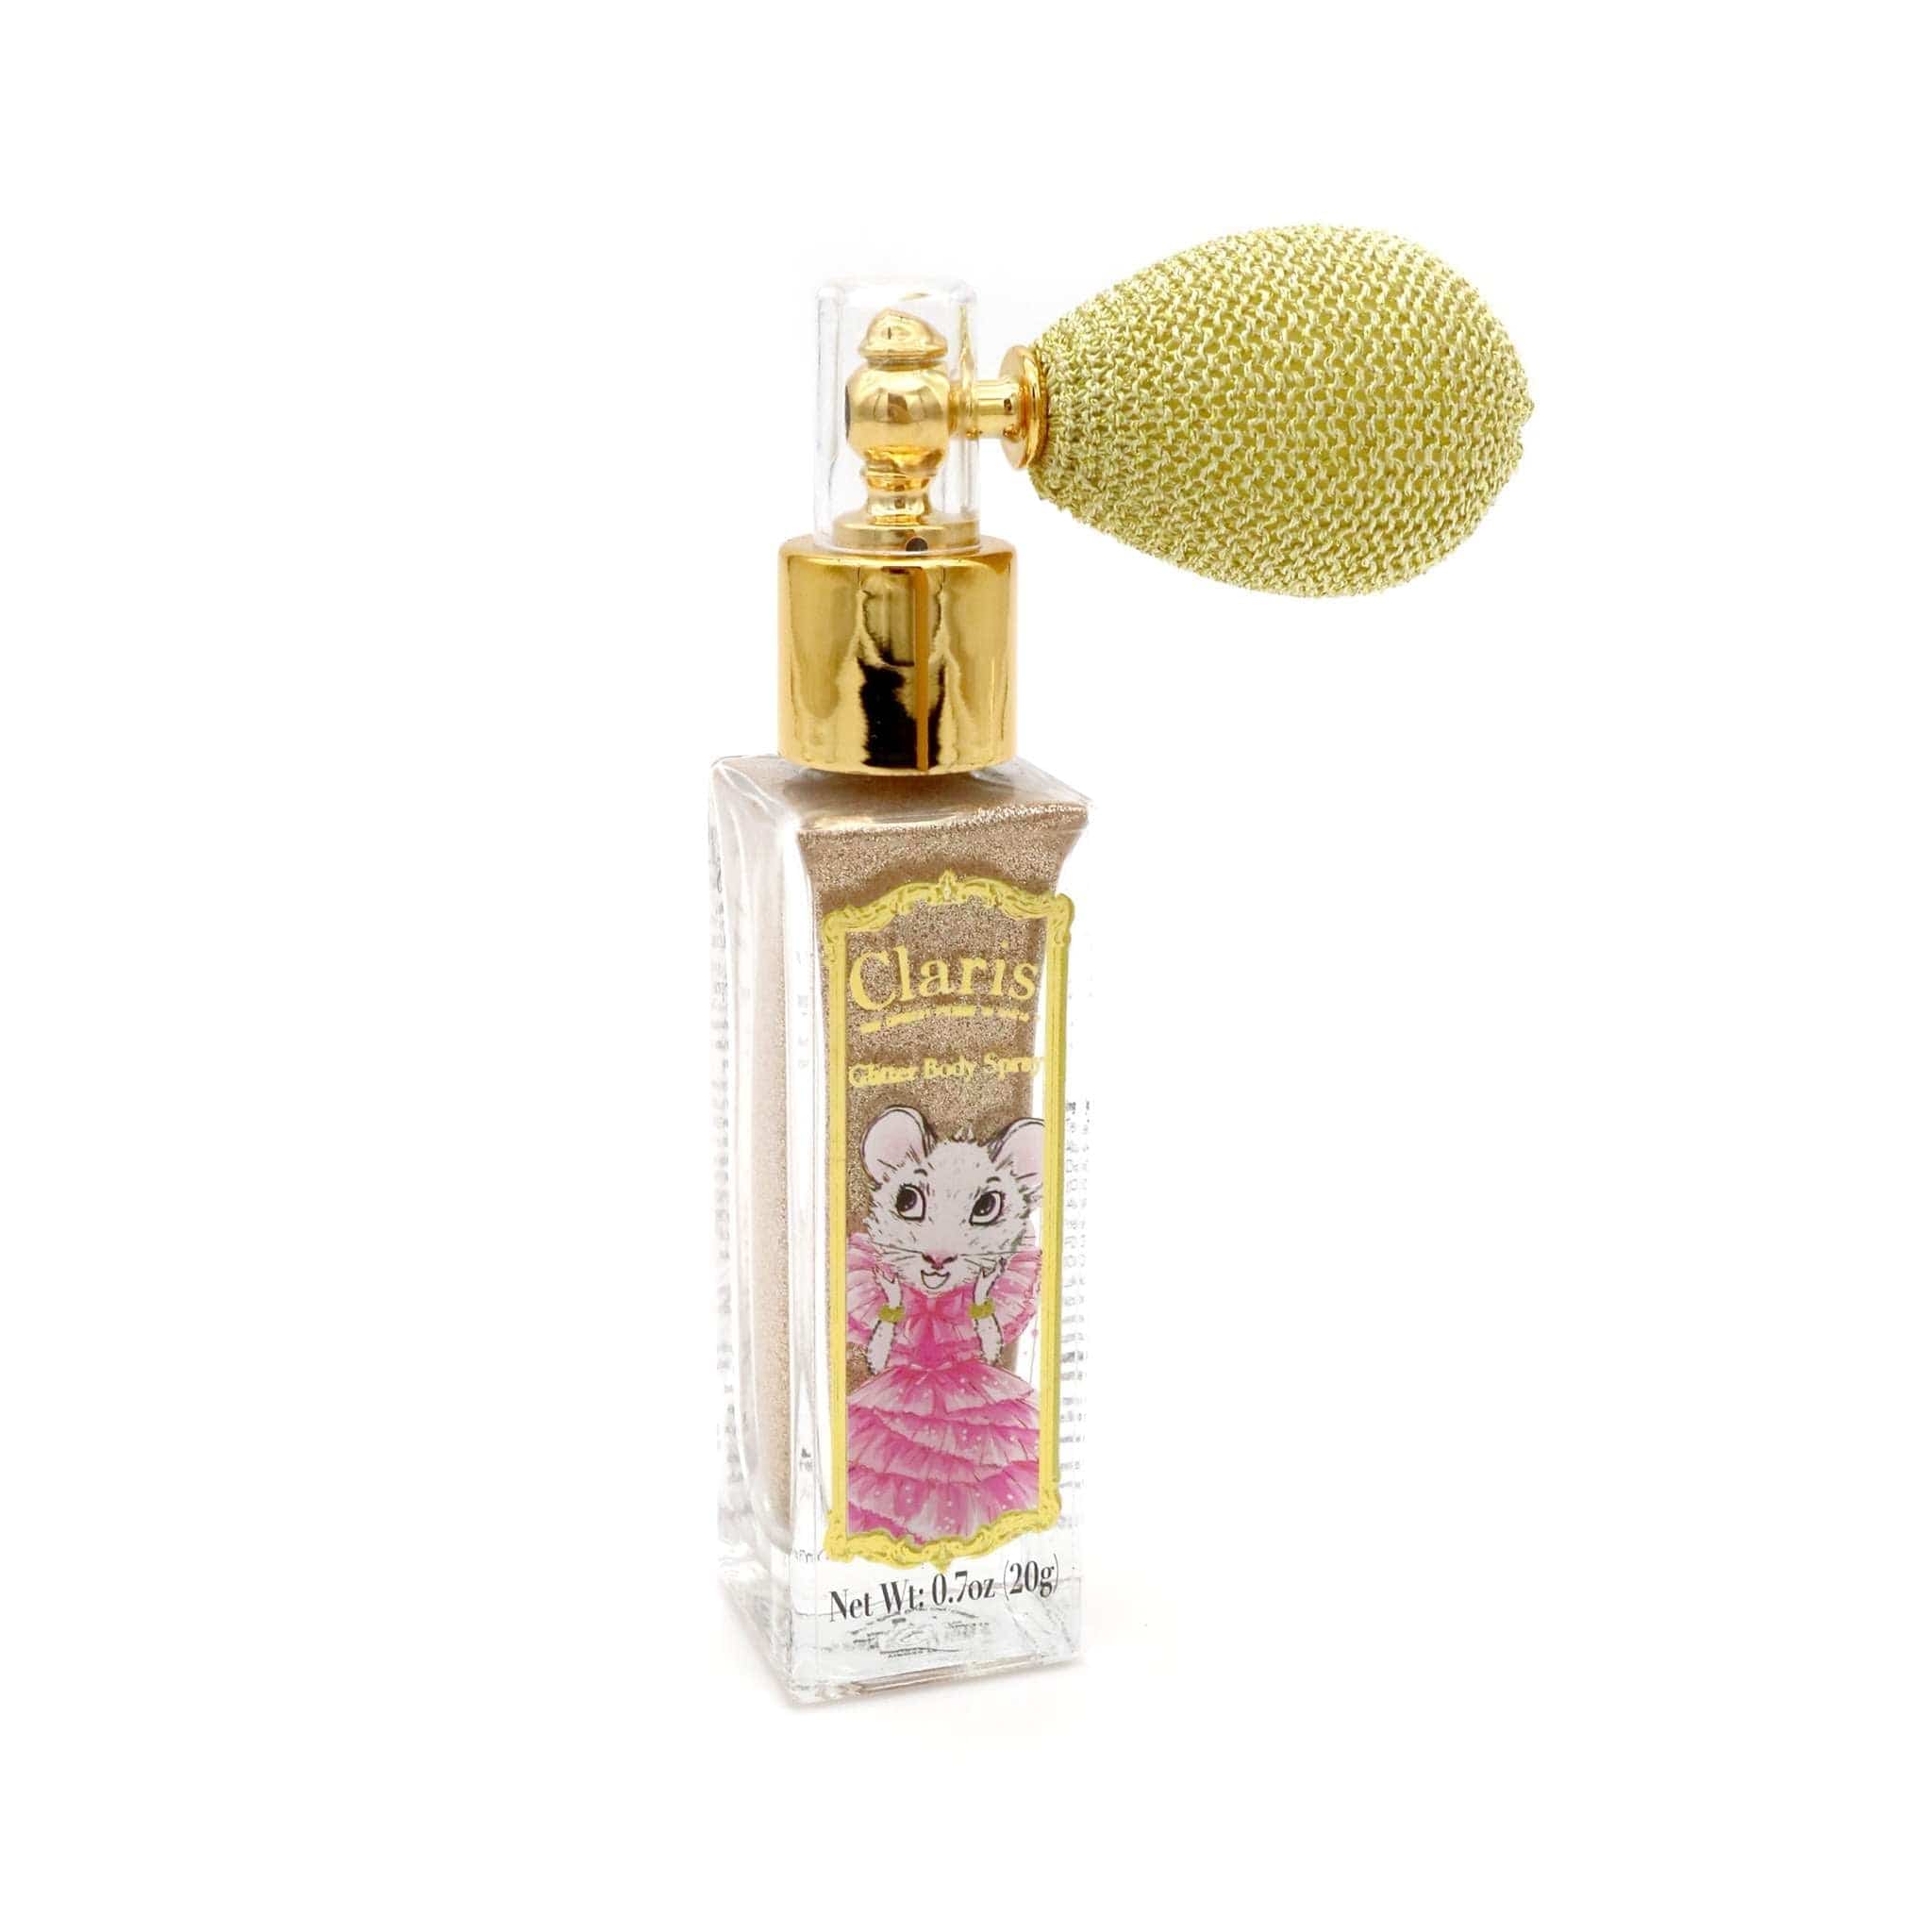 Claris: The Chicest Mouse In Paris™ Glitter Body Spray Atomiser